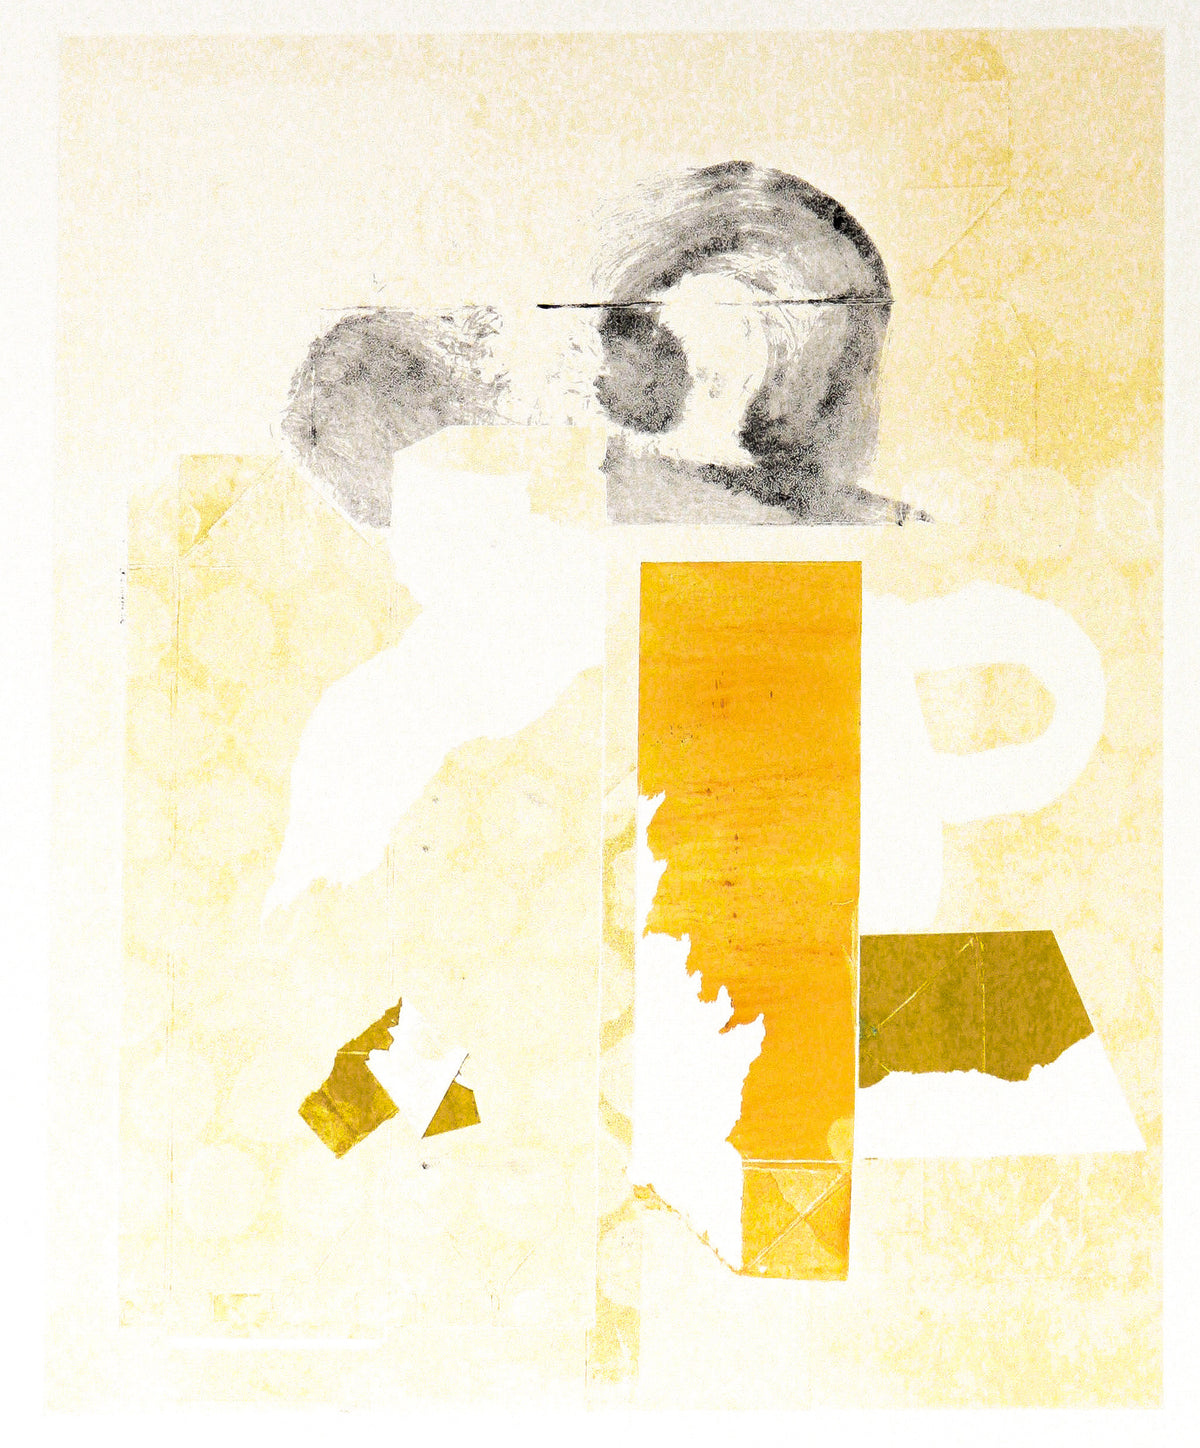 Golden Monotype with Faded Bubble Wrap Detail &lt;br&gt;1992 Monotype&lt;br&gt;&lt;br&gt;#C2613